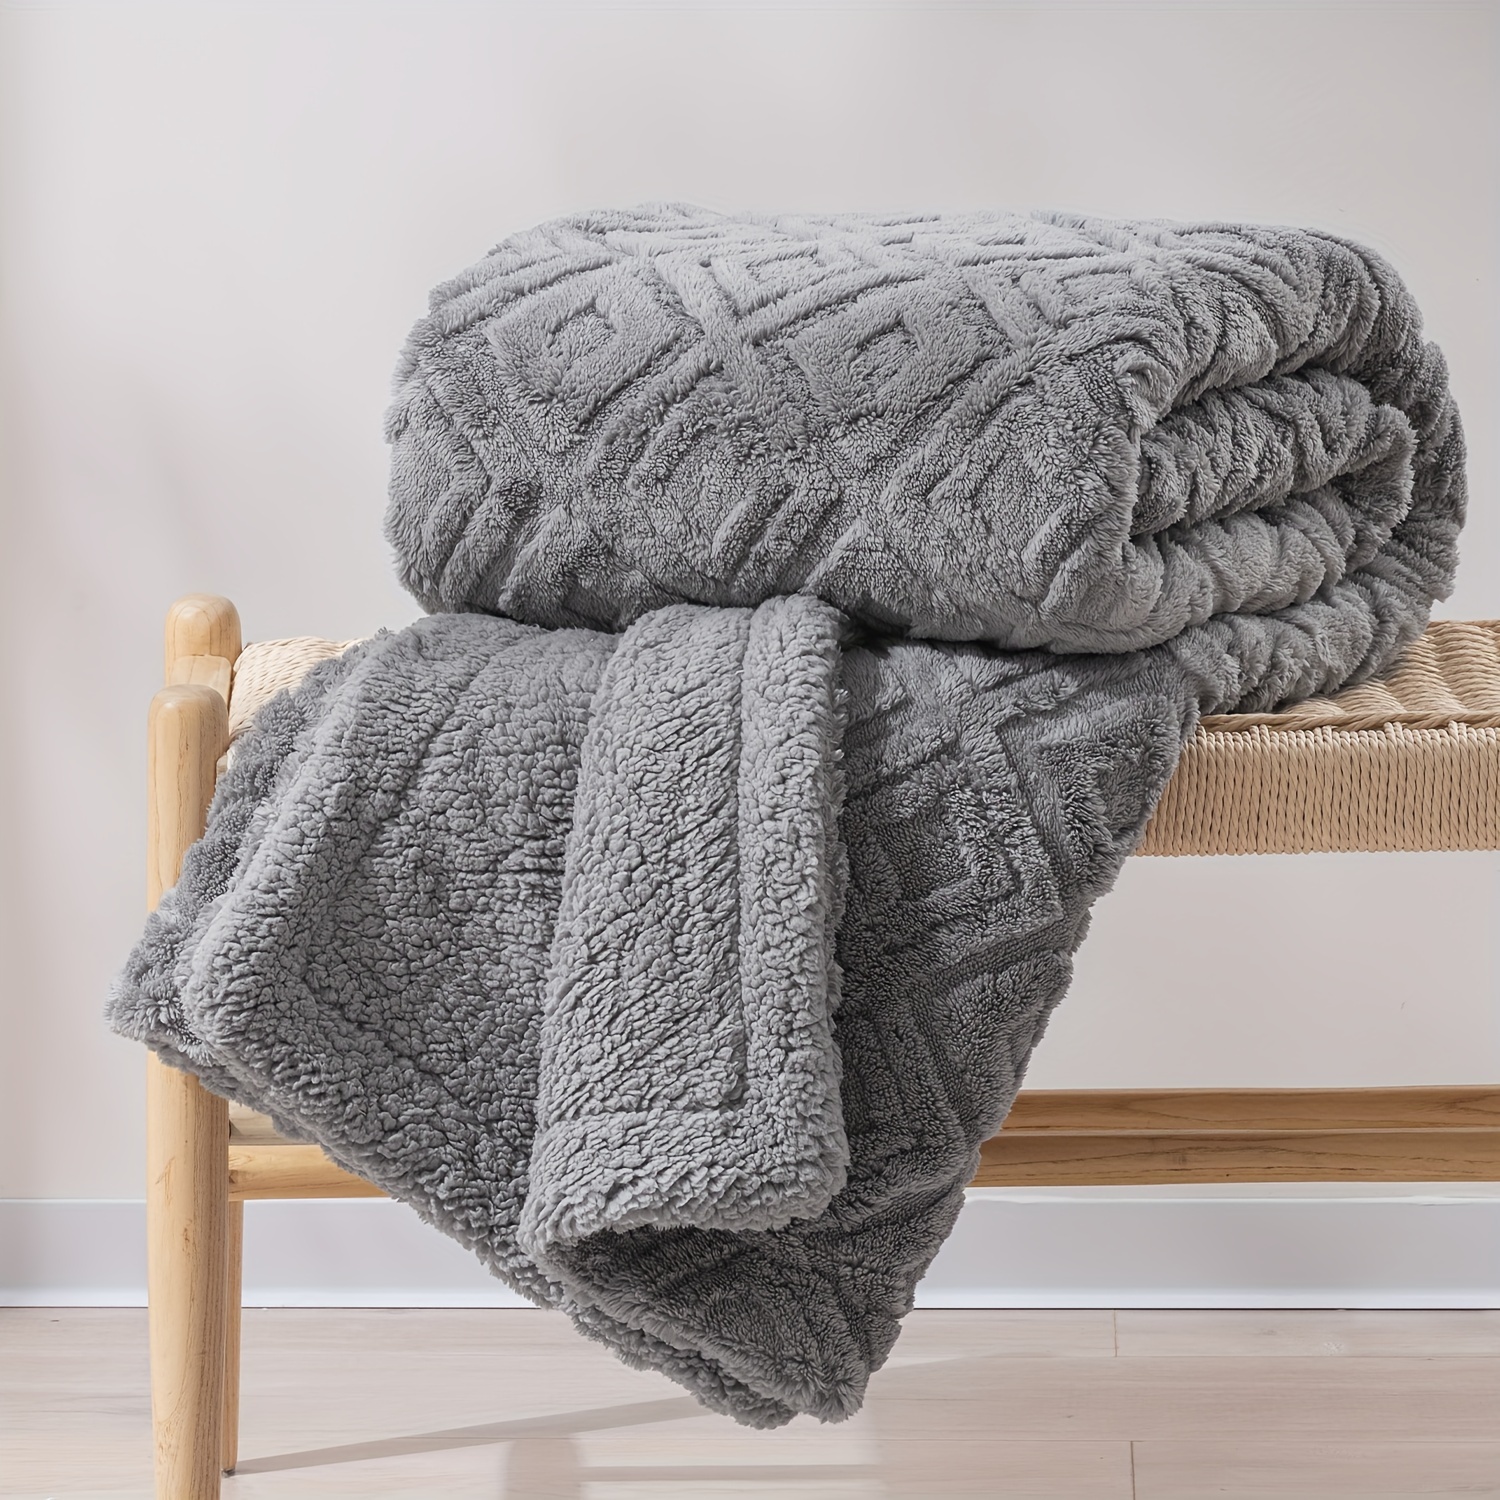 

Evergrace Jacquard Boho Sherpa Fleece Throw Blanket For Couch, Super Soft Cozy Fuzzy Plush Blankets For Winter, Reversible Thick Warm Blanket For Bed, Sofa, Living Room